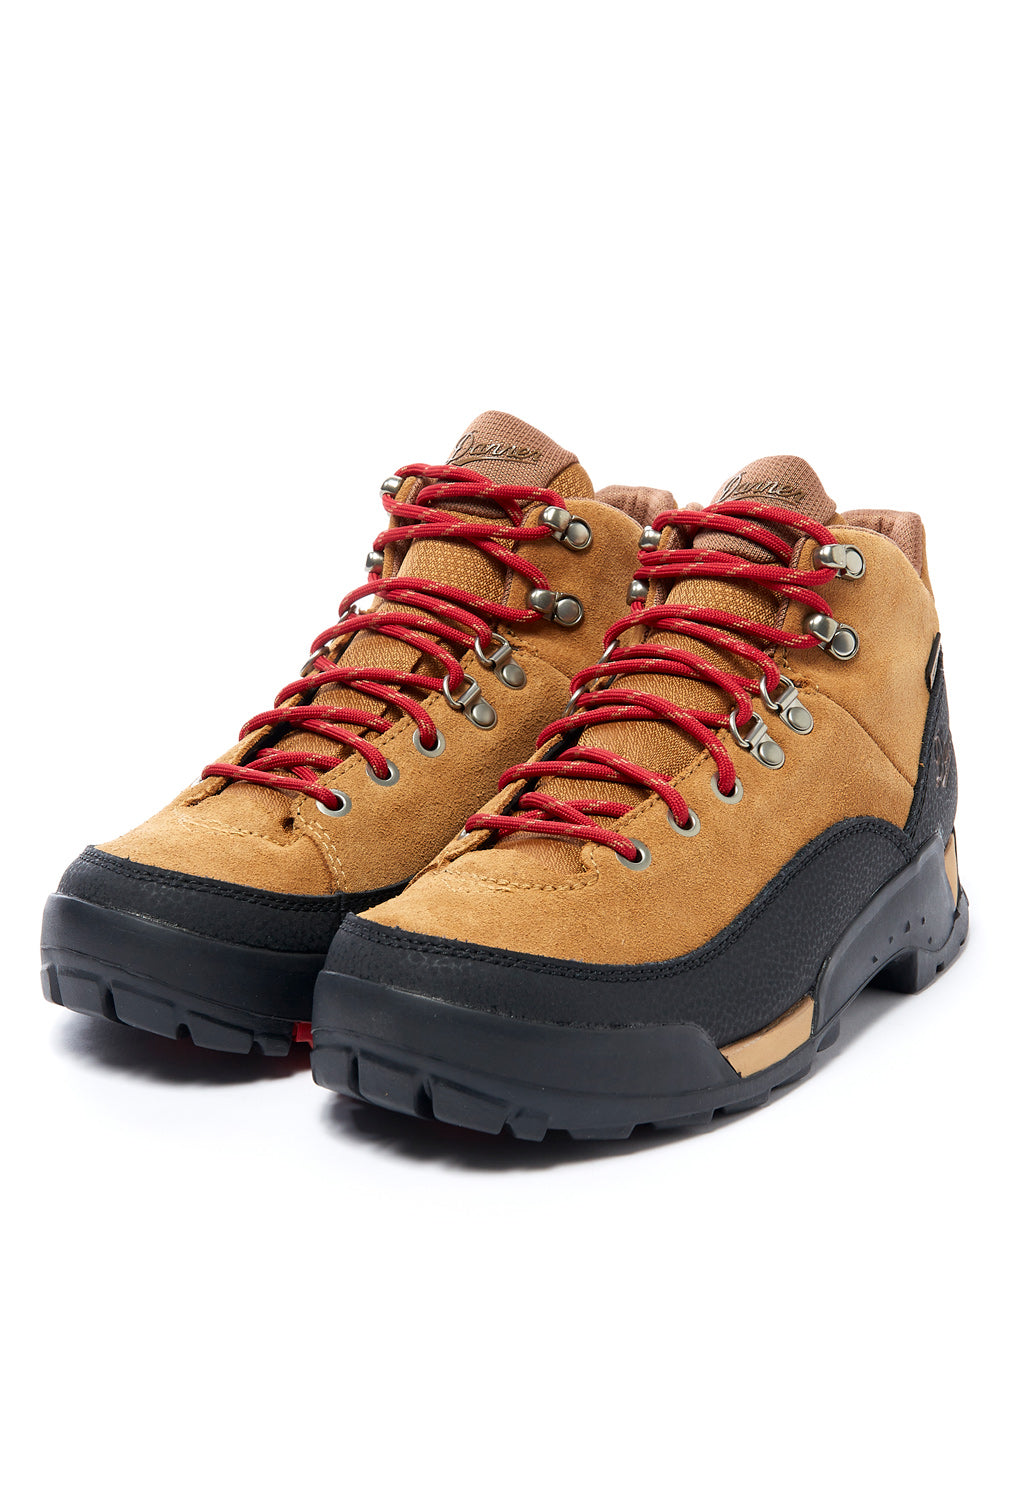 Danner Panorama Mid Boots - Brown/Red